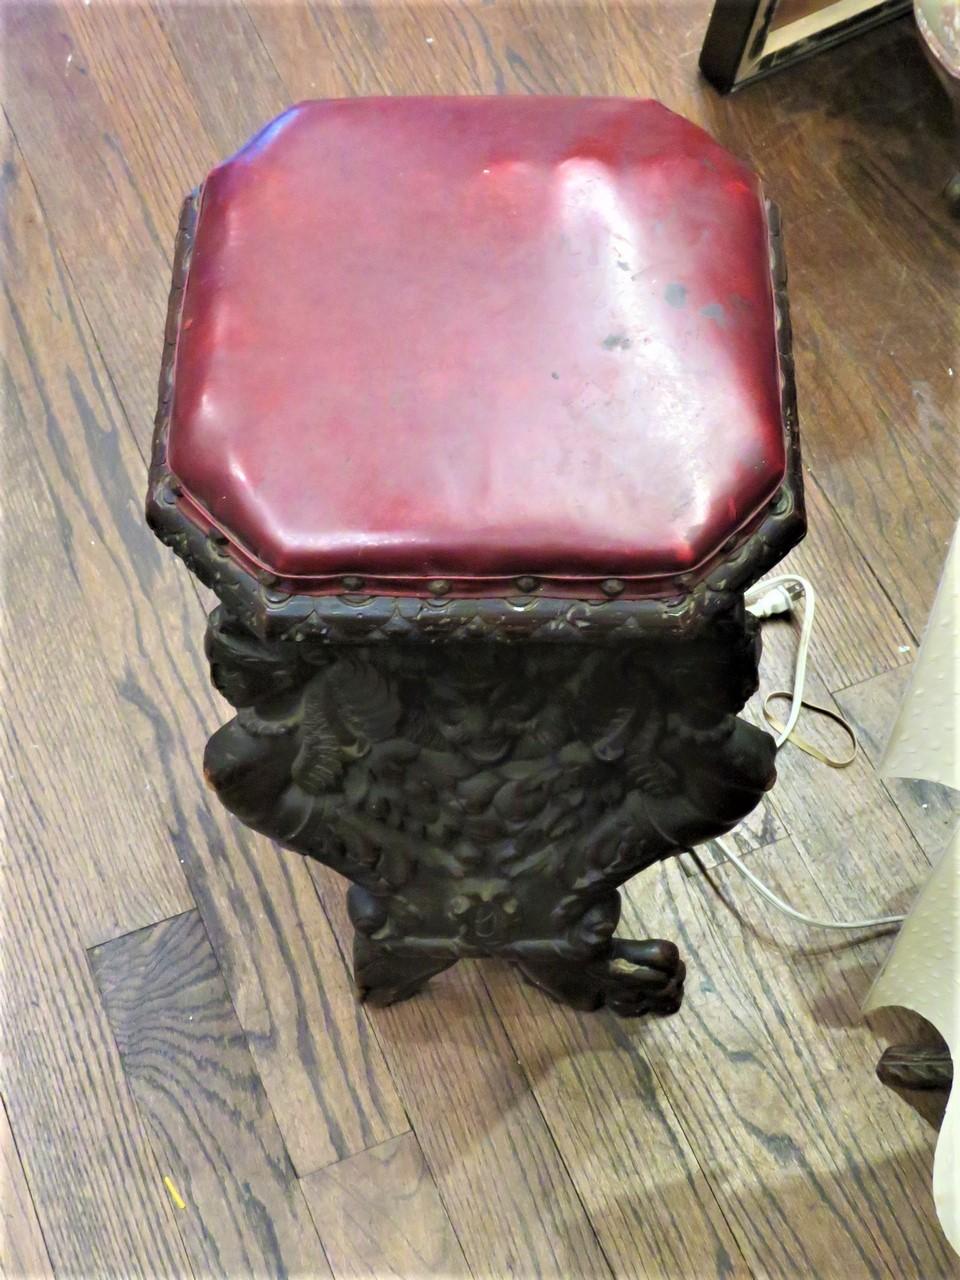 The Following Item we are Offering is a Rare Outstanding 19th Century Red Leather Upholstered Top Carved Wooden Antique Stool Table. Stool Table is done with Outstanding Scrolled Detail with Carved Busts of Women attached to a male figure.